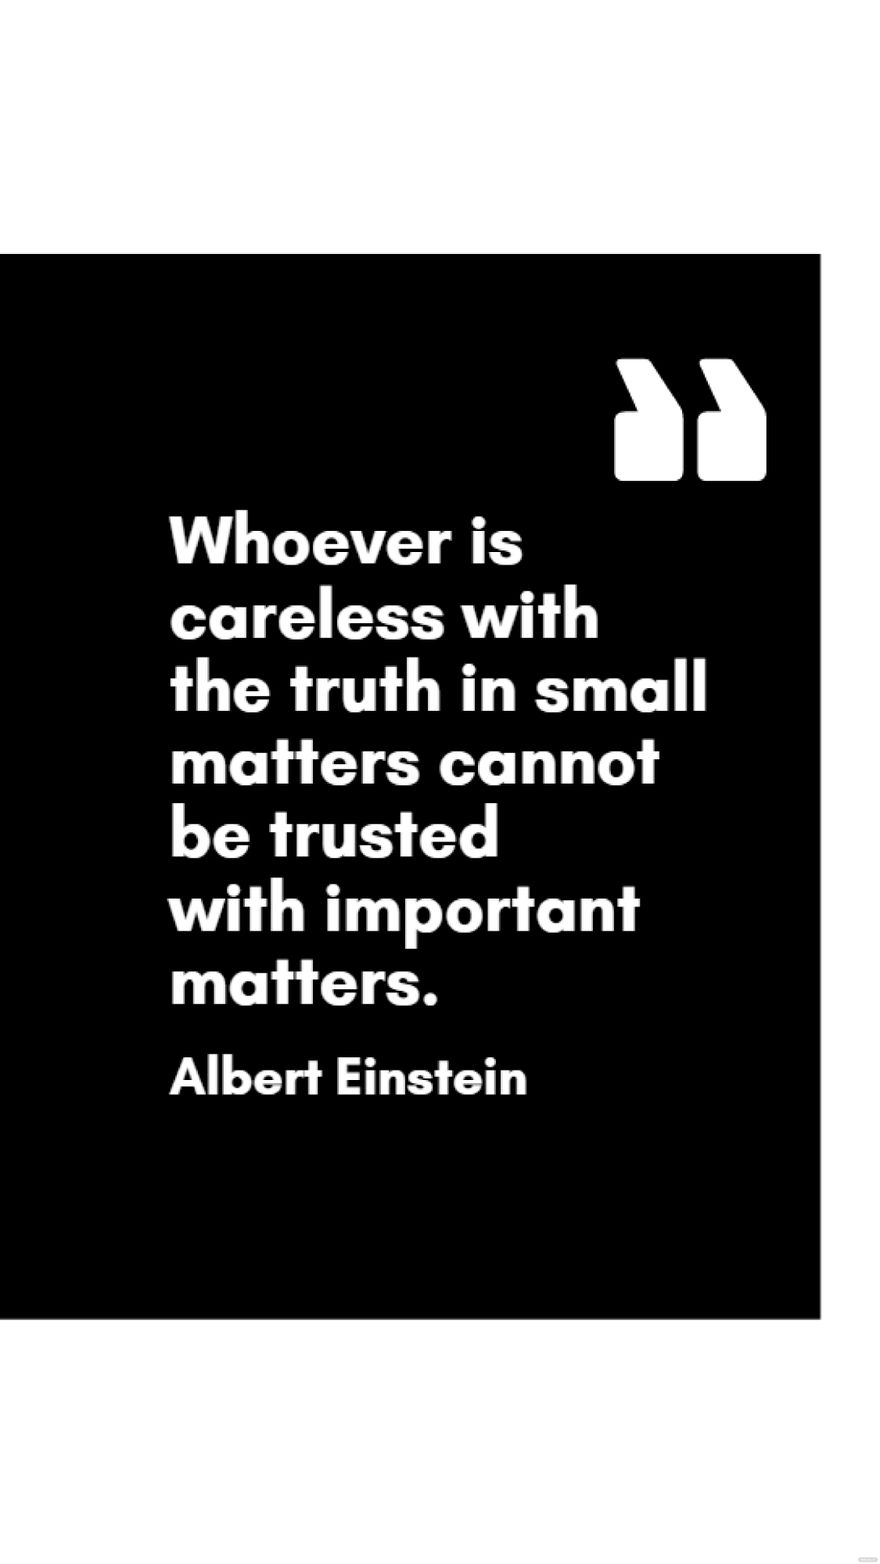 Albert Einstein - Whoever is careless with the truth in small matters cannot be trusted with important matters.